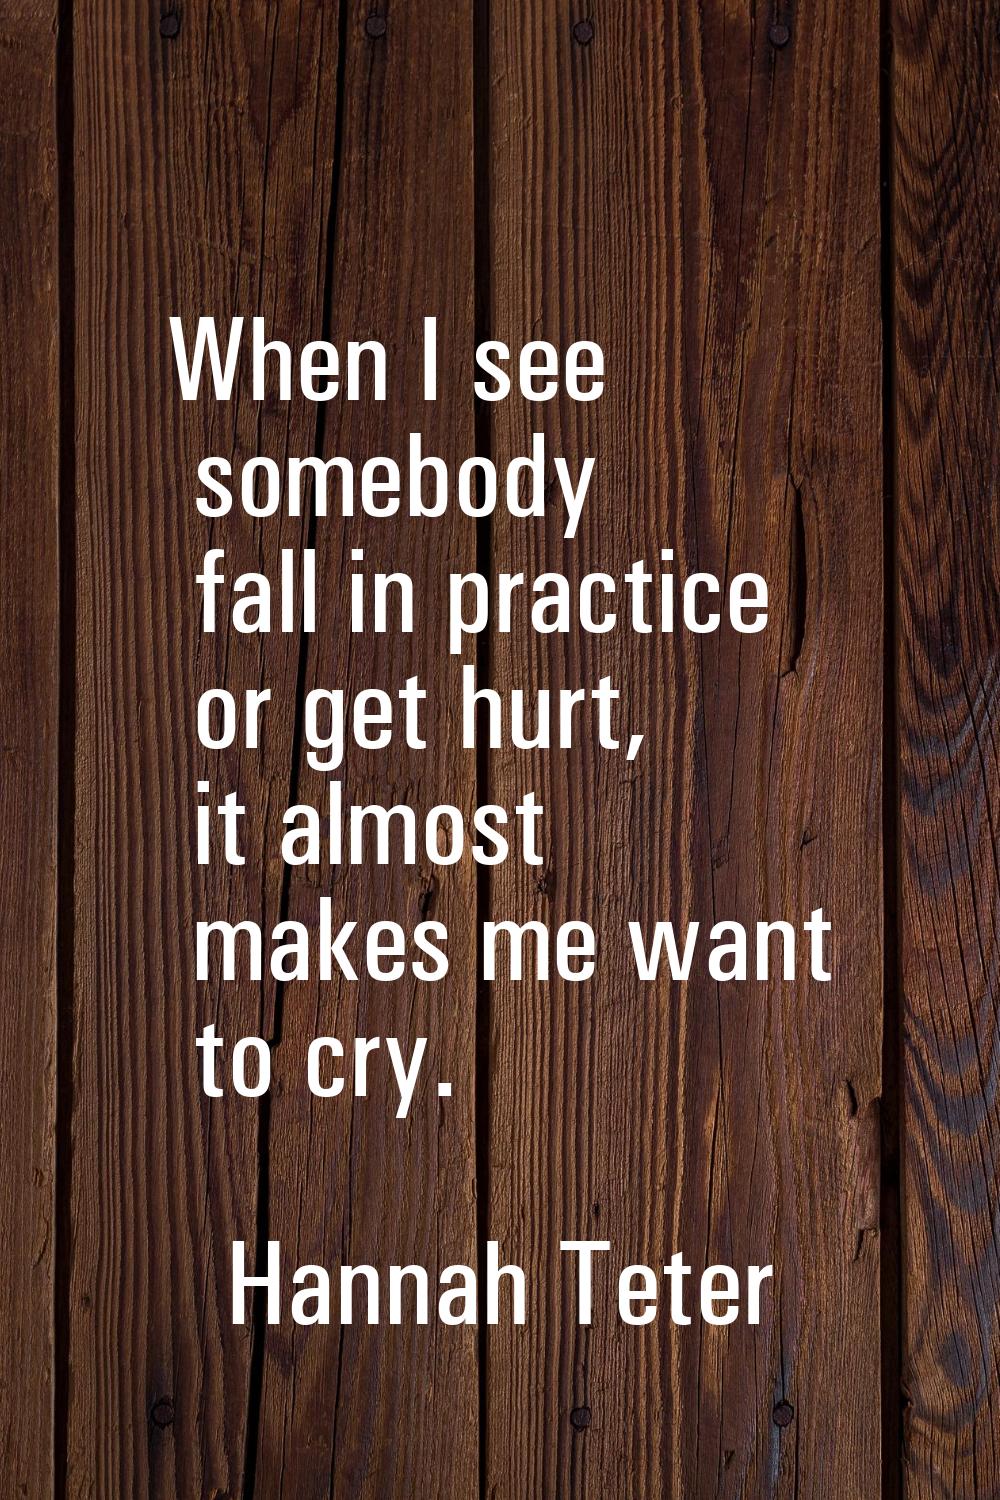 When I see somebody fall in practice or get hurt, it almost makes me want to cry.